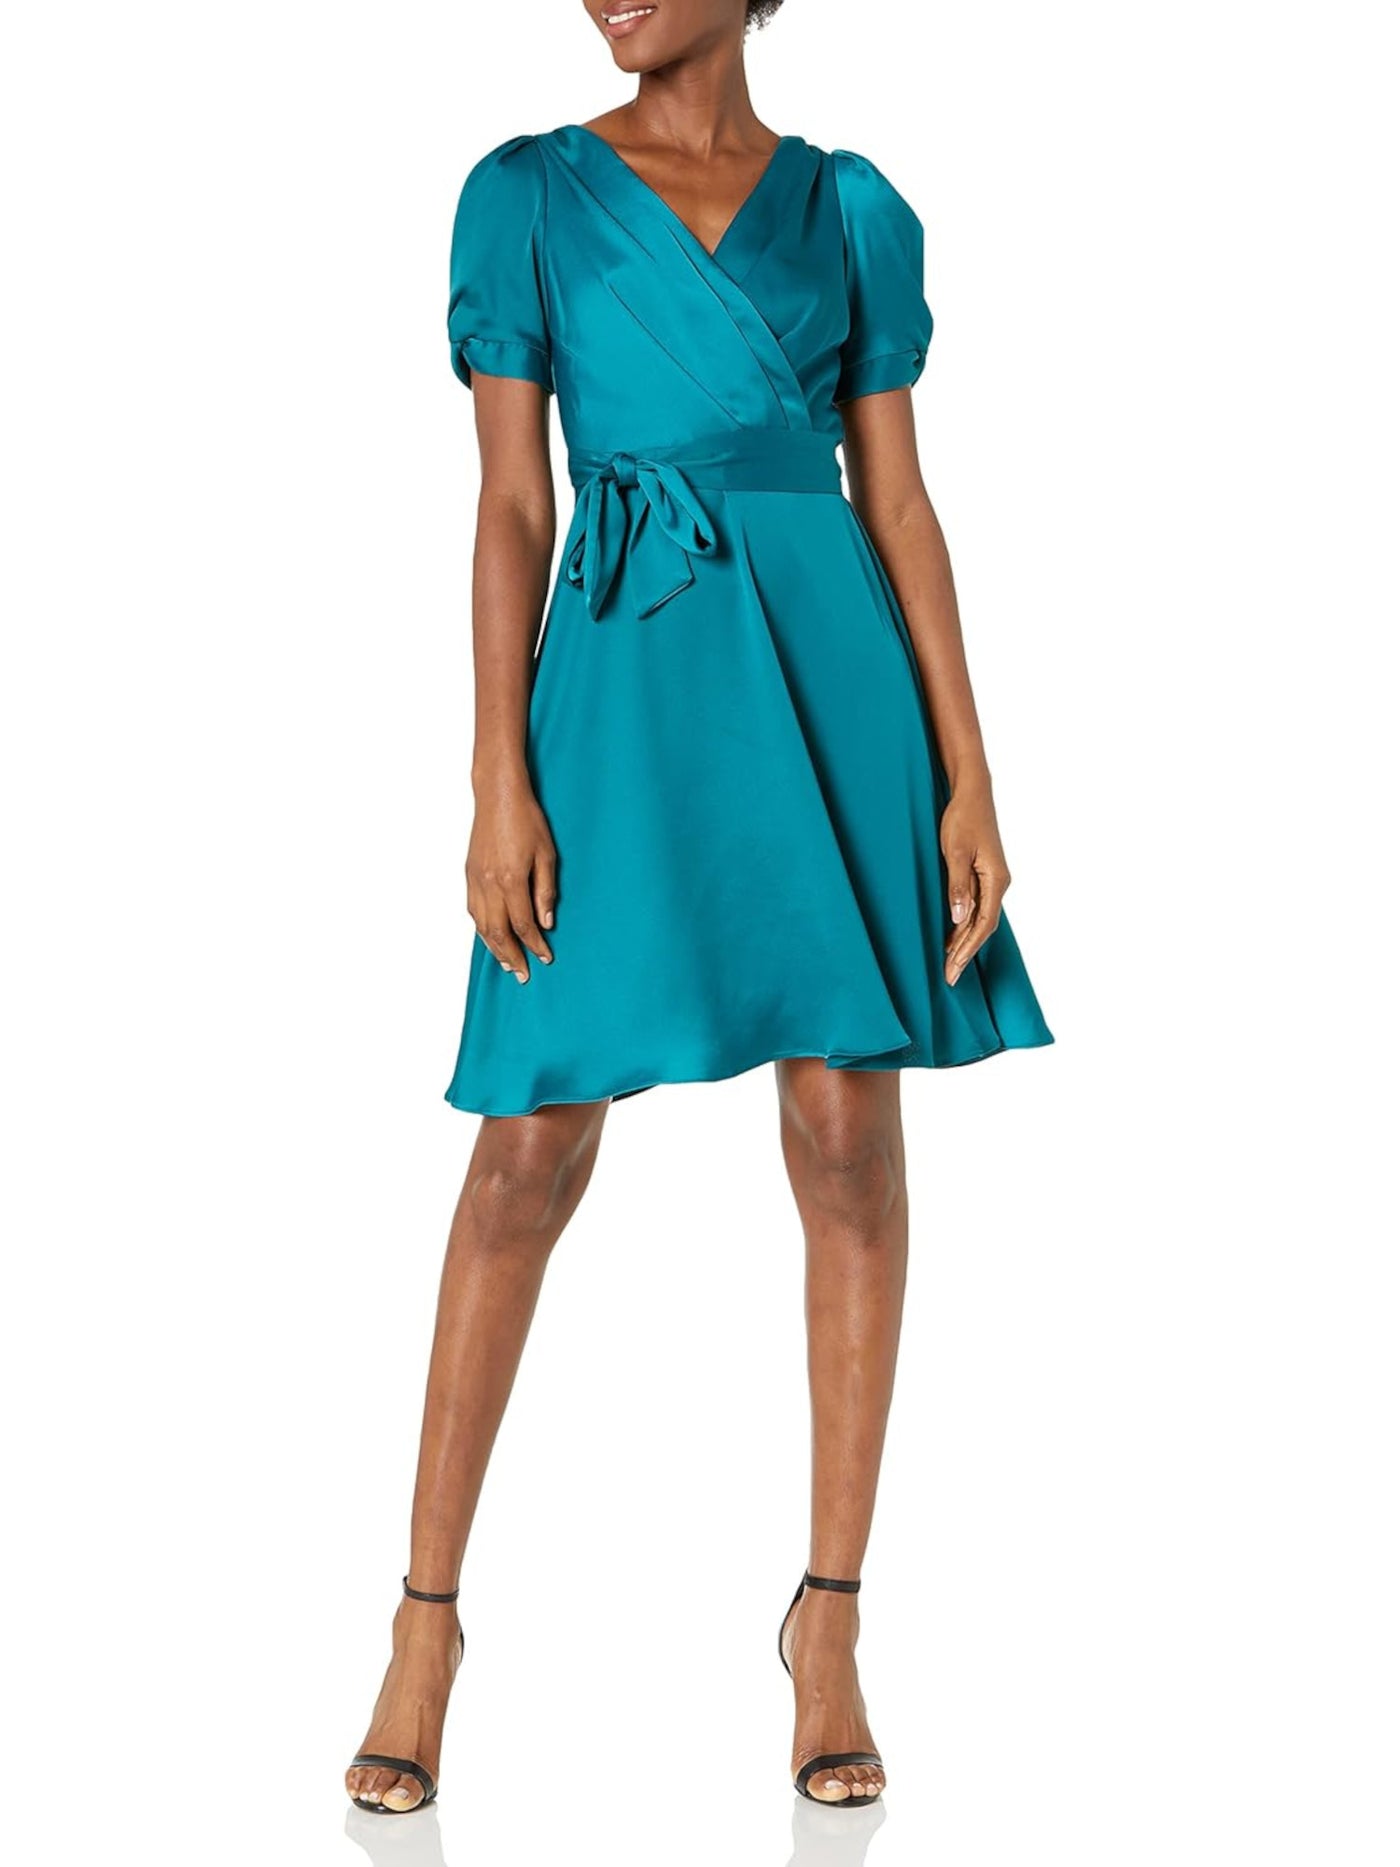 DKNY Womens Teal Tie Zippered Knot Sleeve Surplice Neckline Above The Knee Active Wear Fit + Flare Dress 8